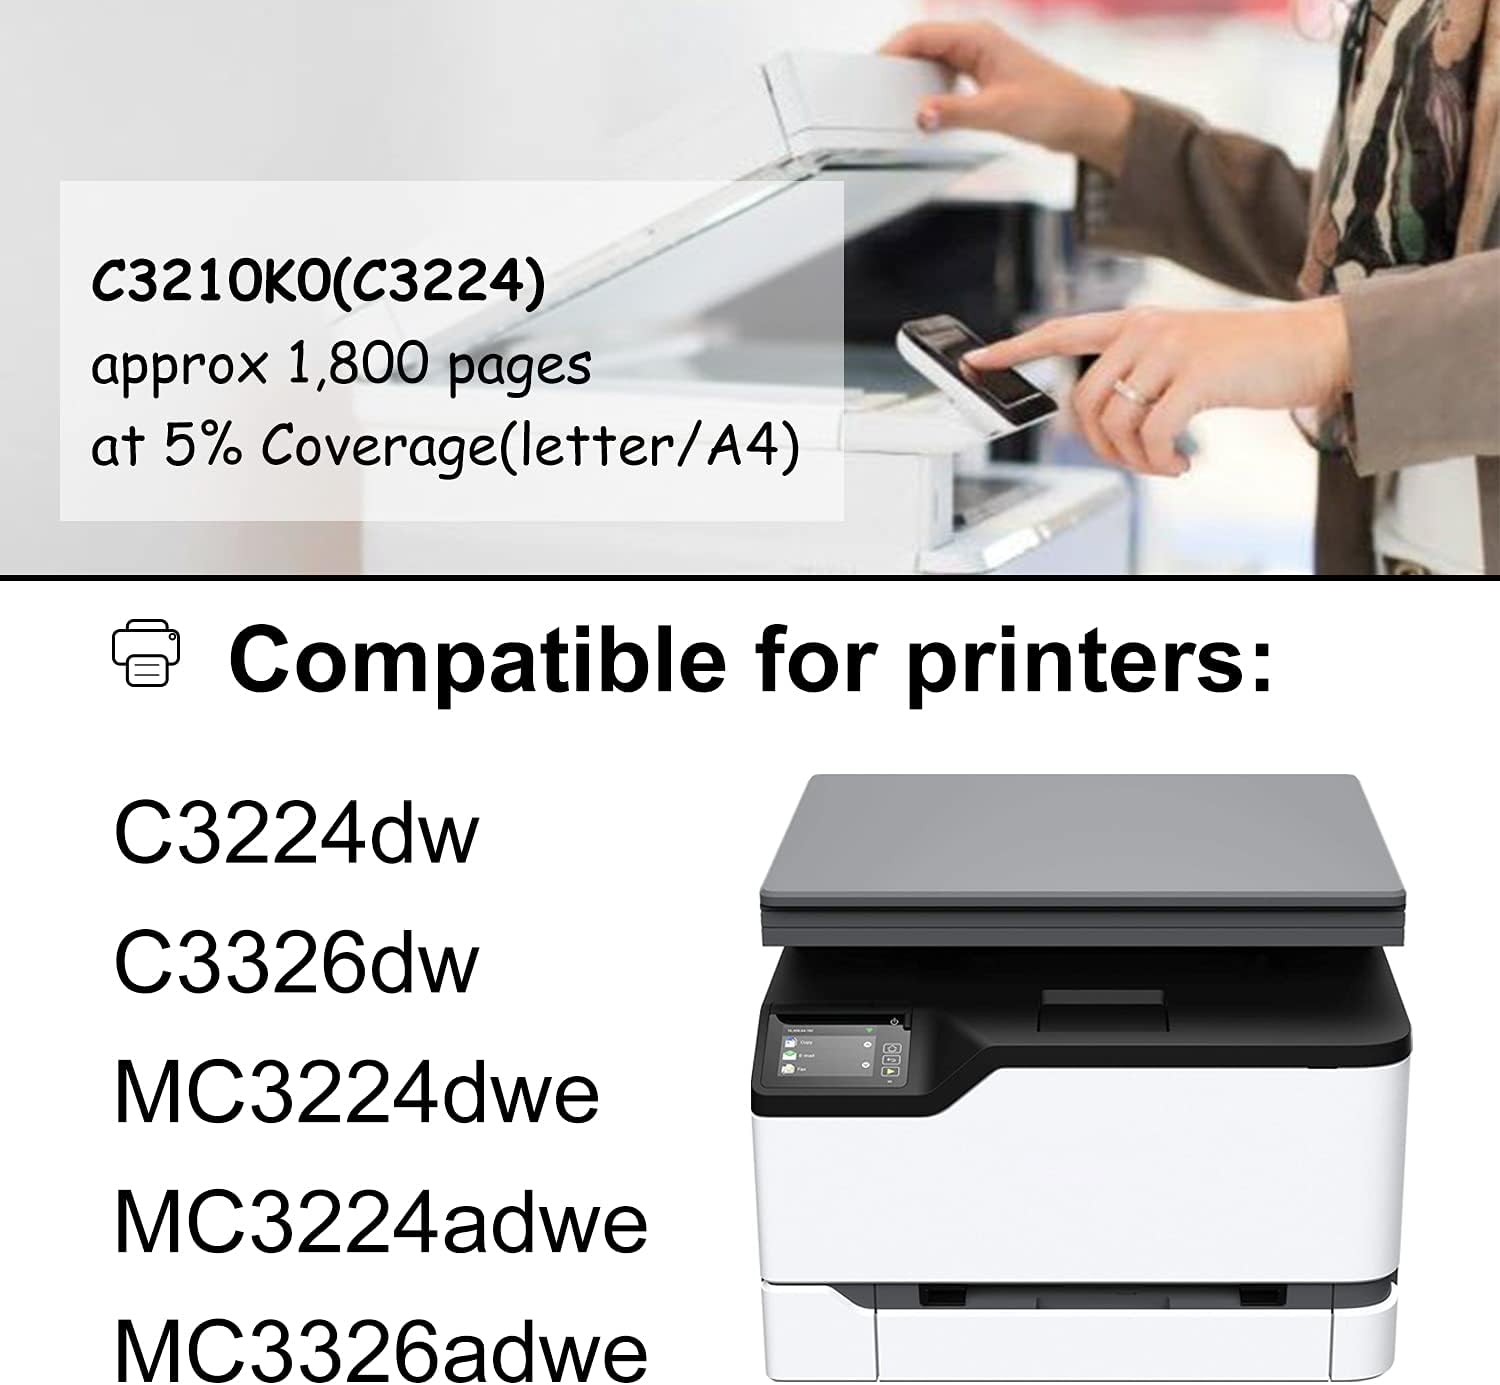 How to Extend Printing Life With Lexmark MC3224 Black Toner: 7 Clever Printer Tricks You Never Thought Of